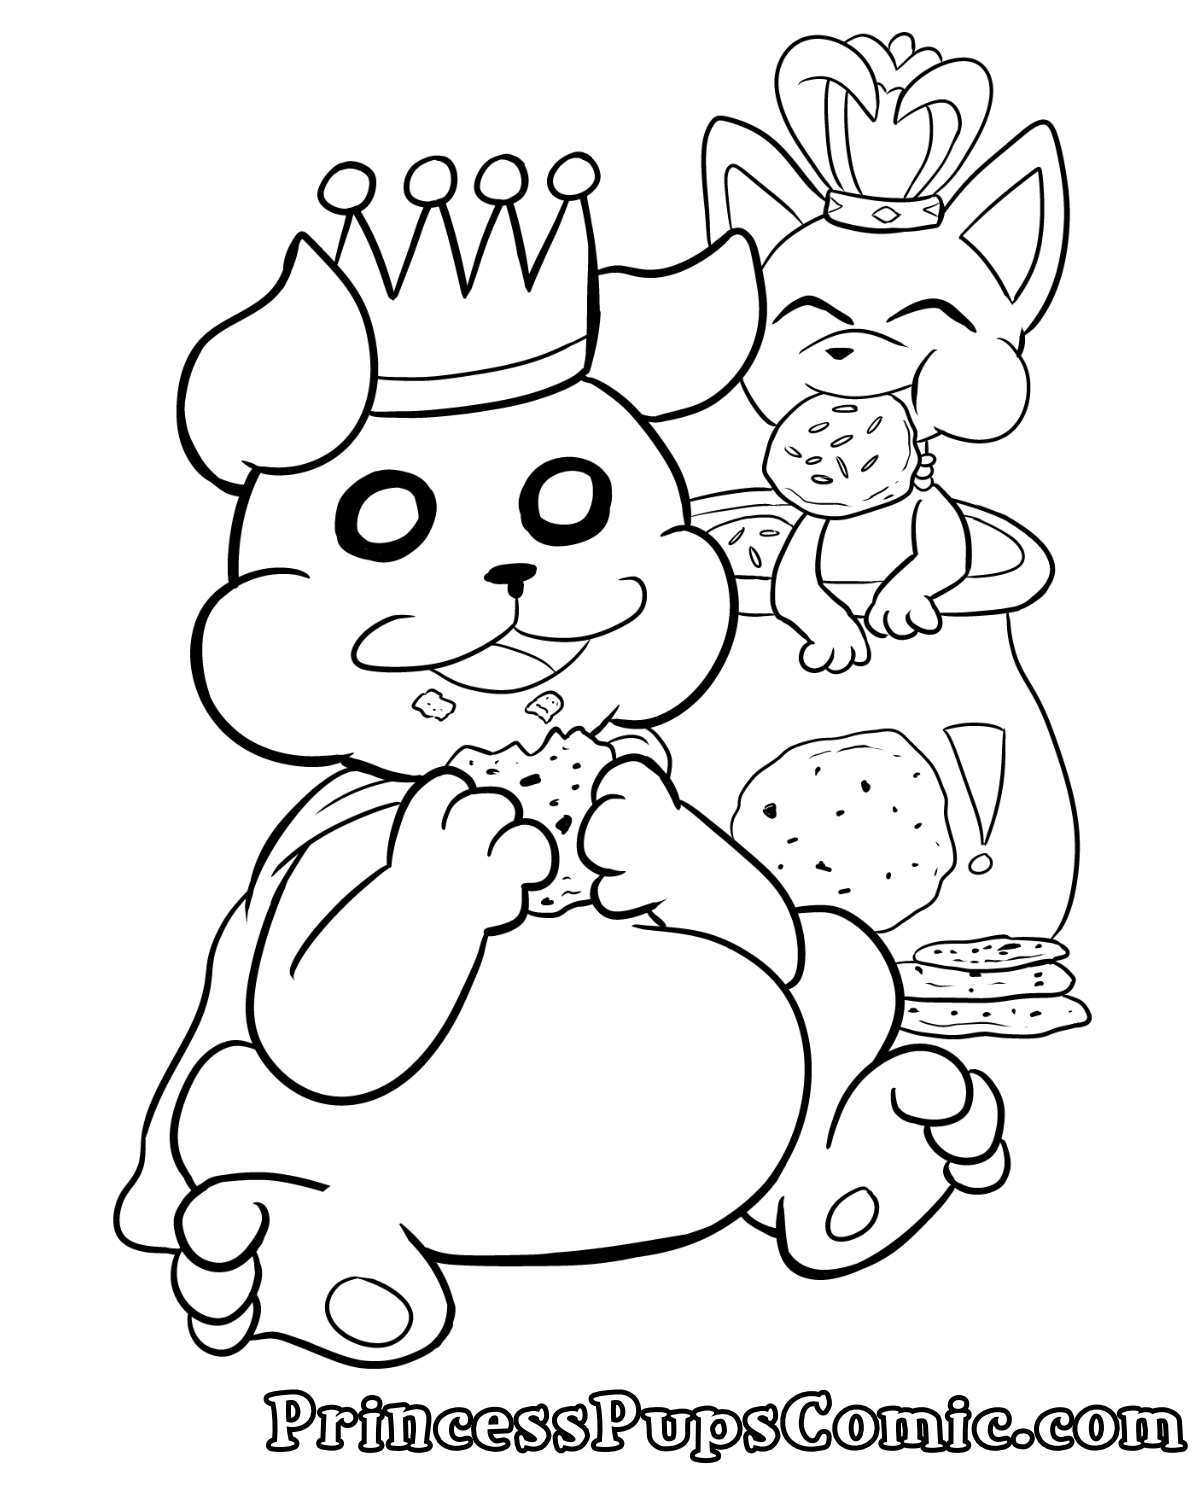 king and queen coloring page